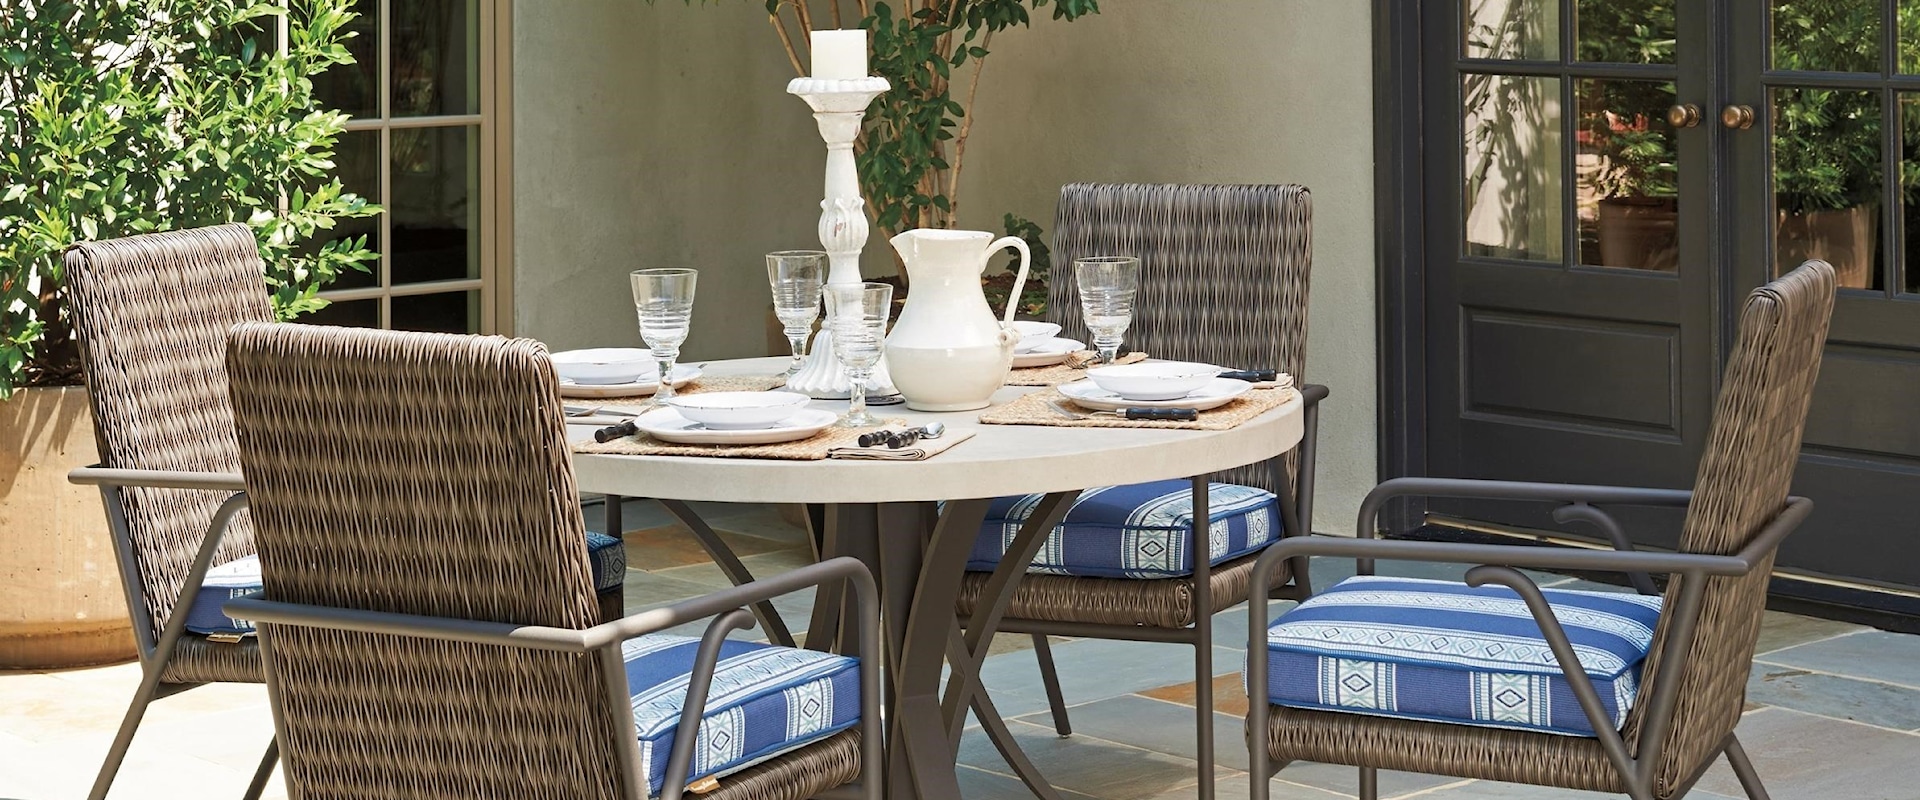 5 Pc Outdoor Dining Set